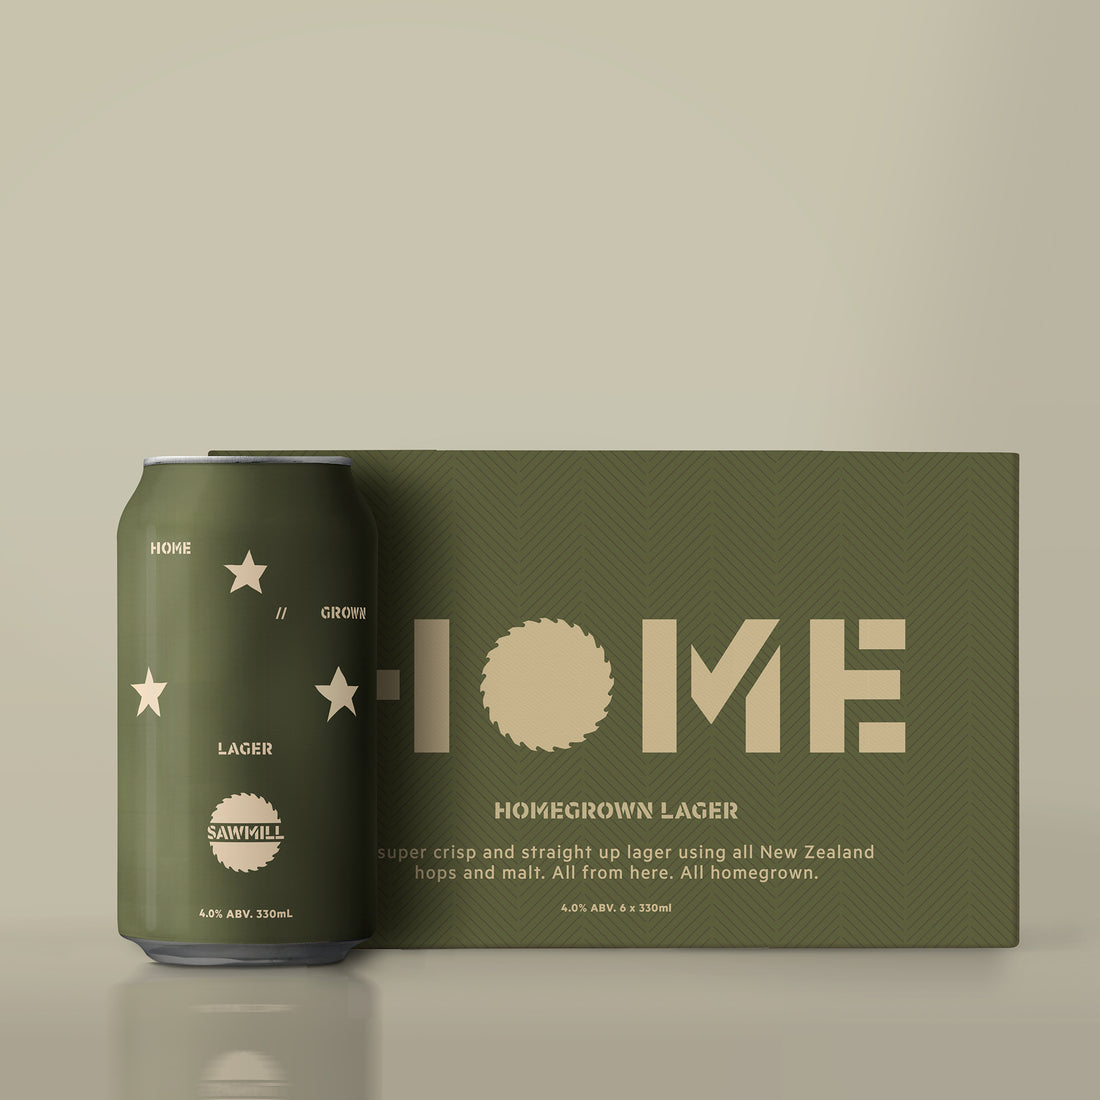 Homegrown Lager